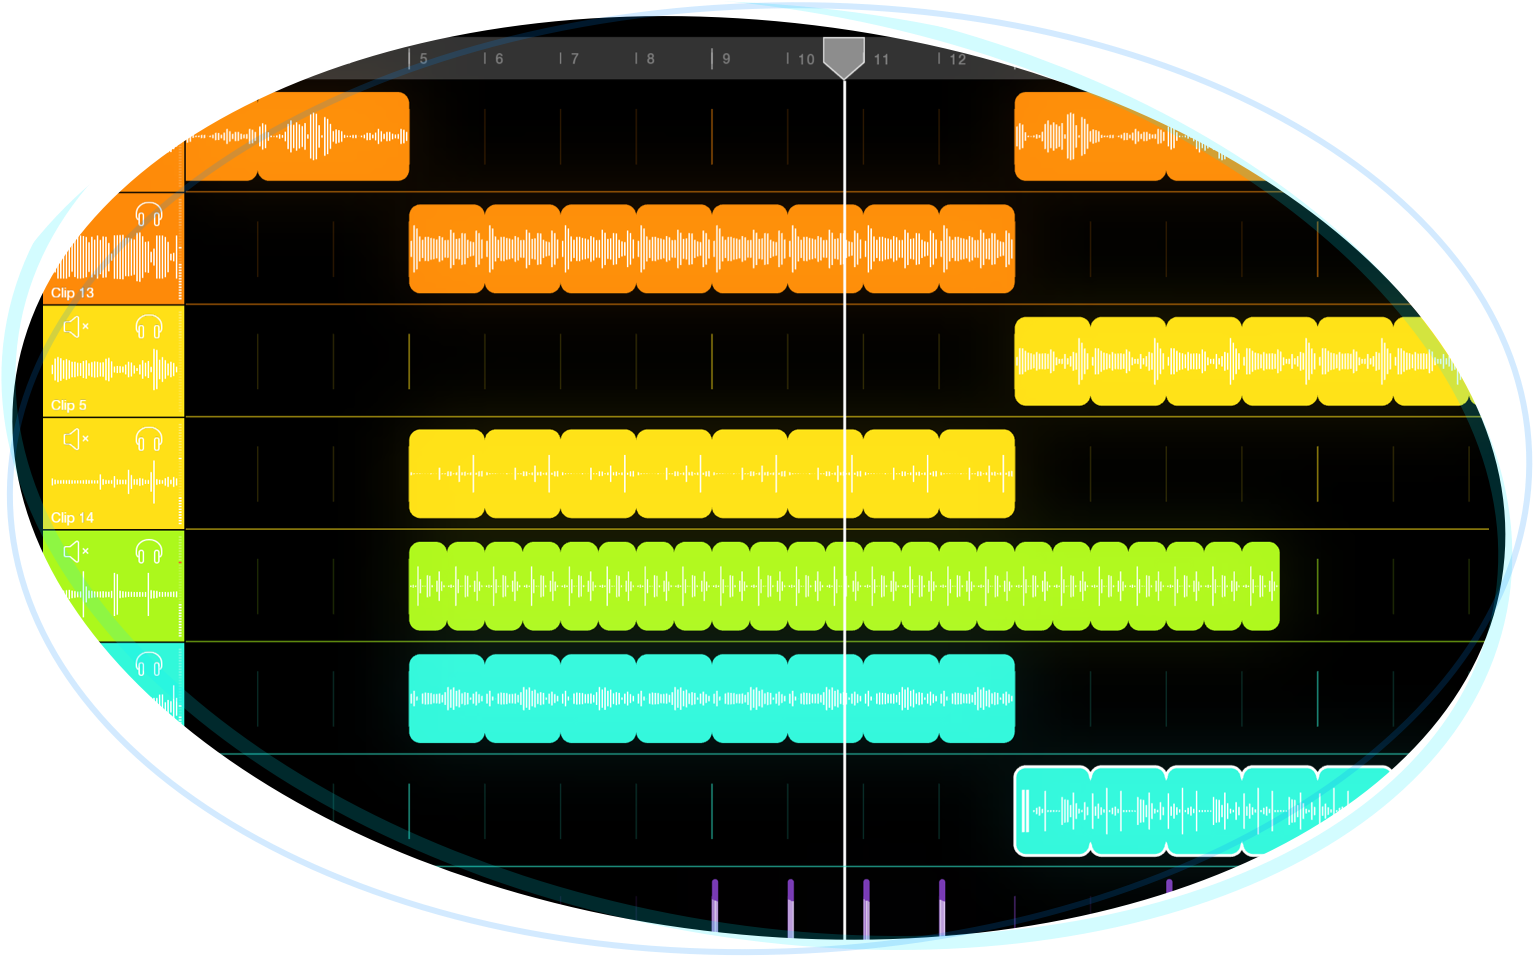 Loopy Pro screenshot showing multi-track sequencer view